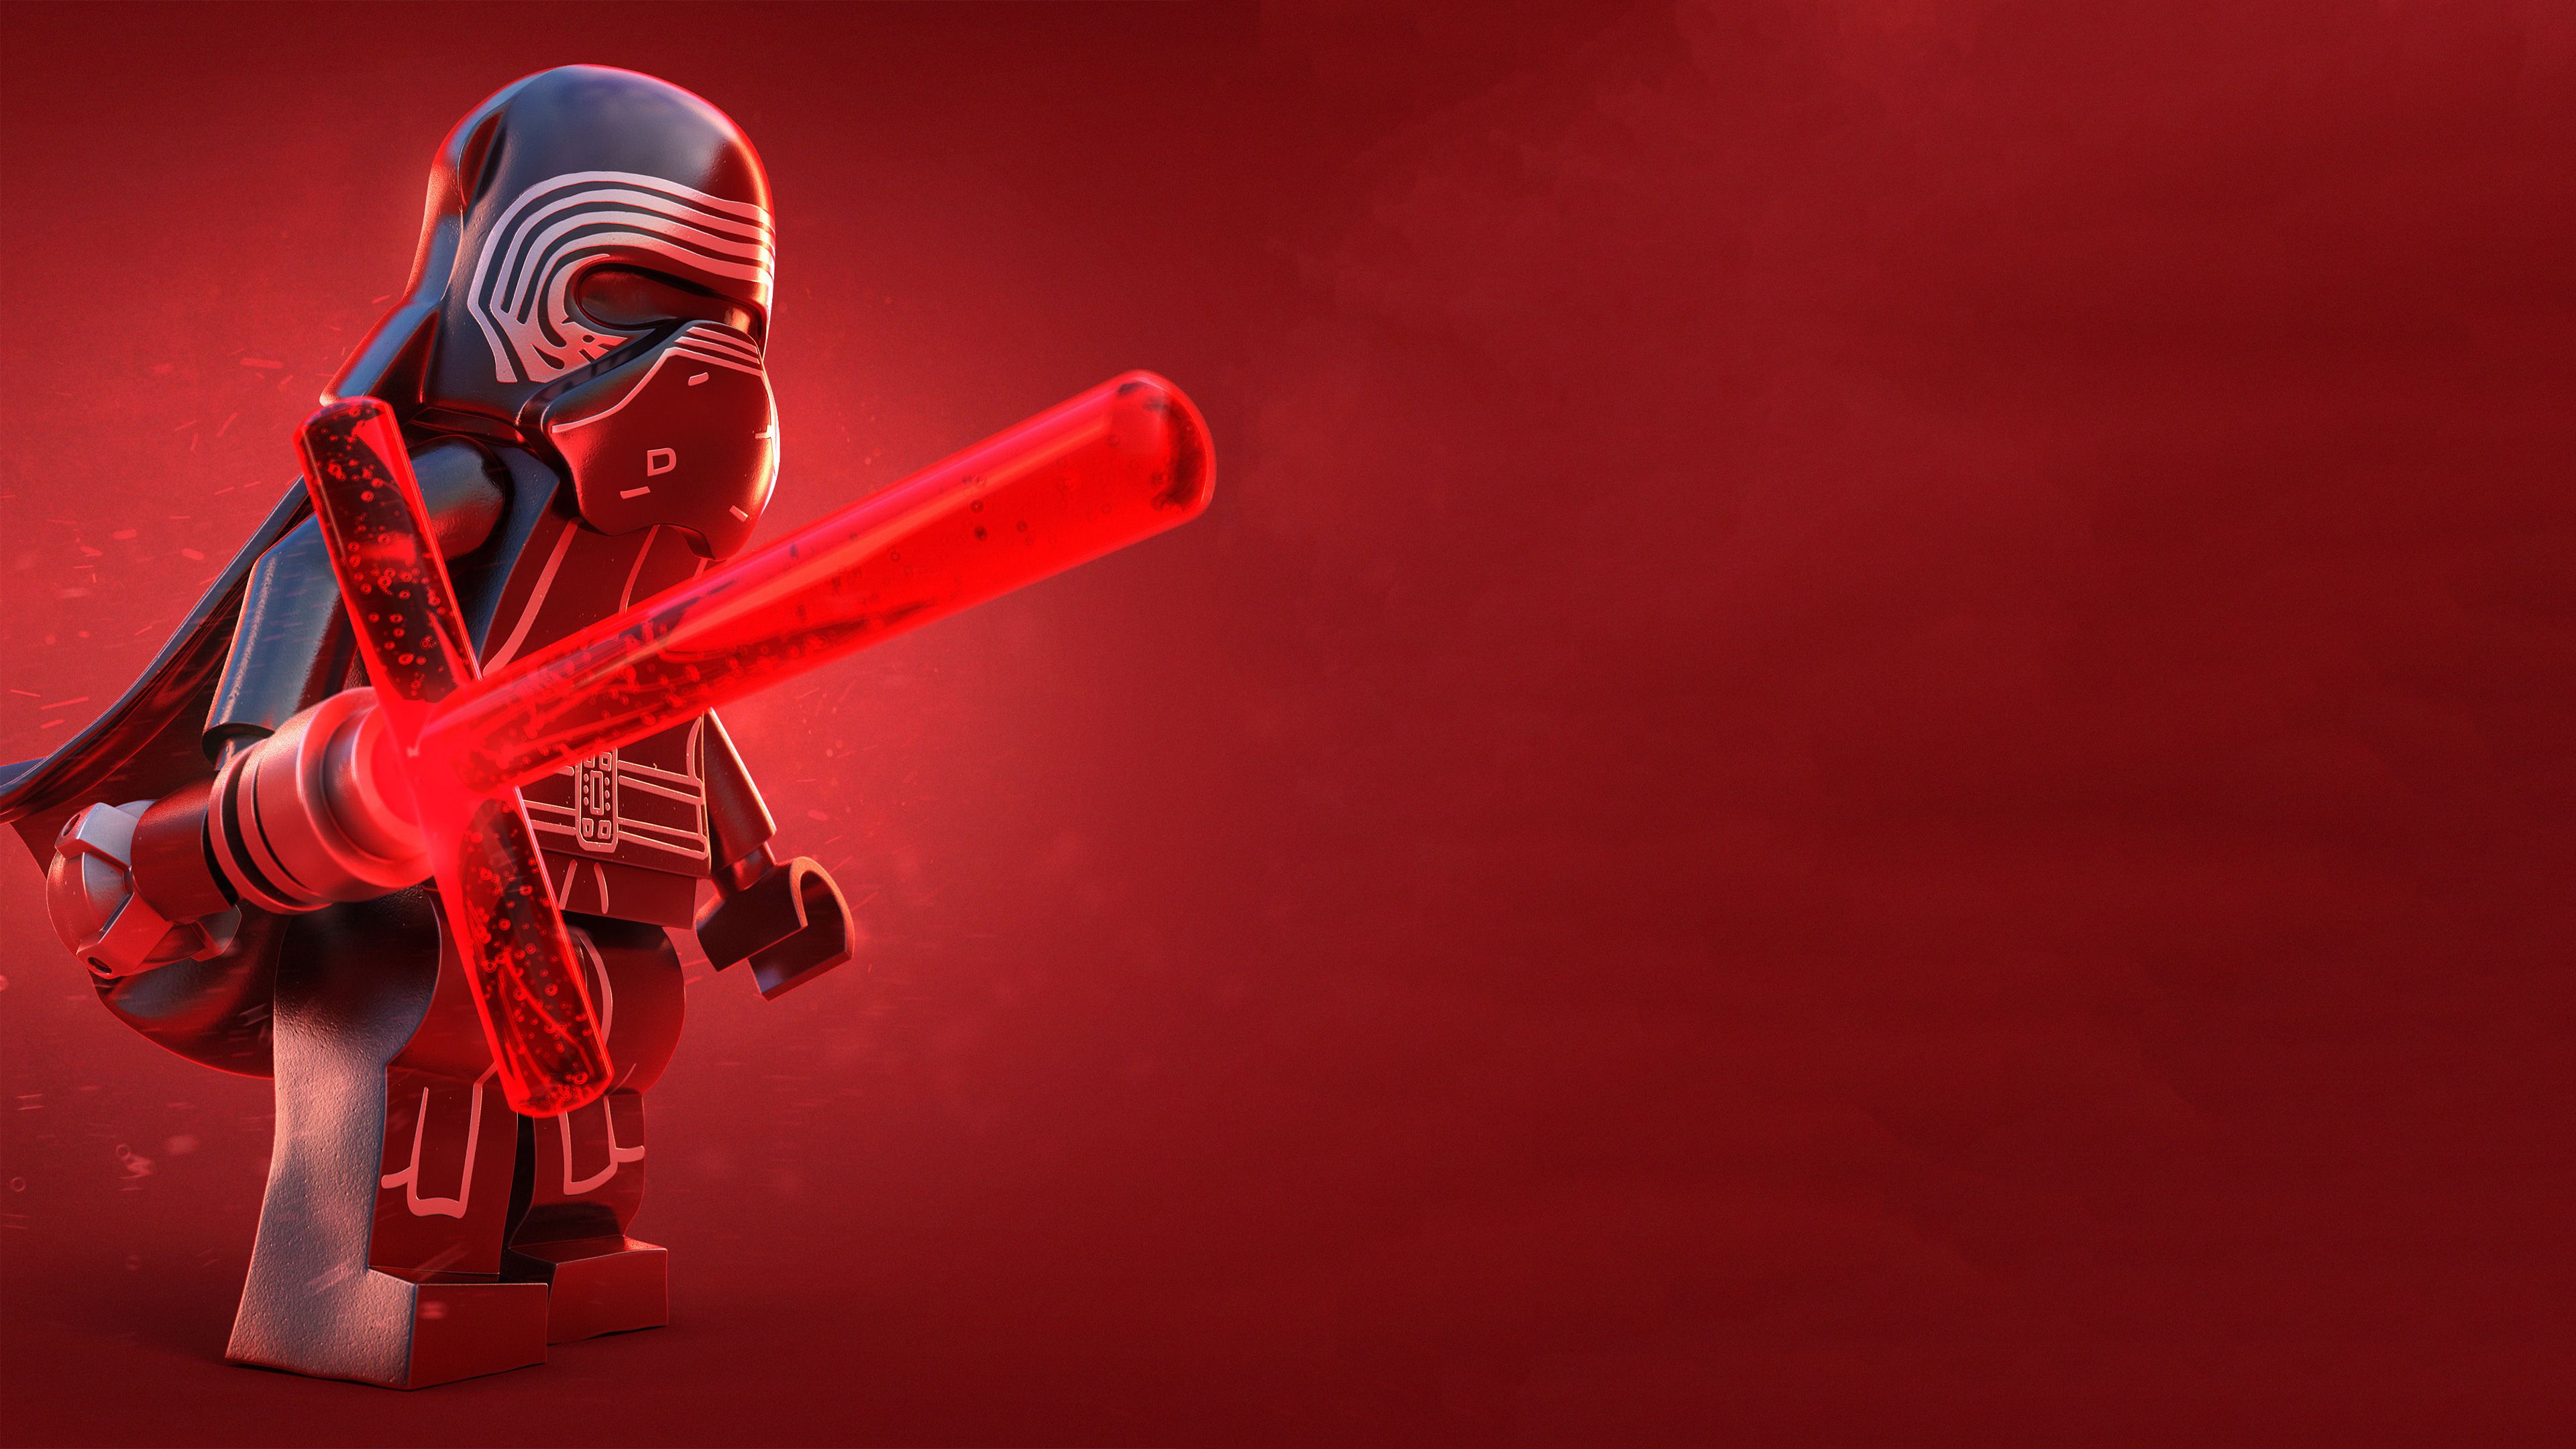 The Dark Side Lego, HD Artist, 4k Wallpaper, Image, Background, Photo and Picture